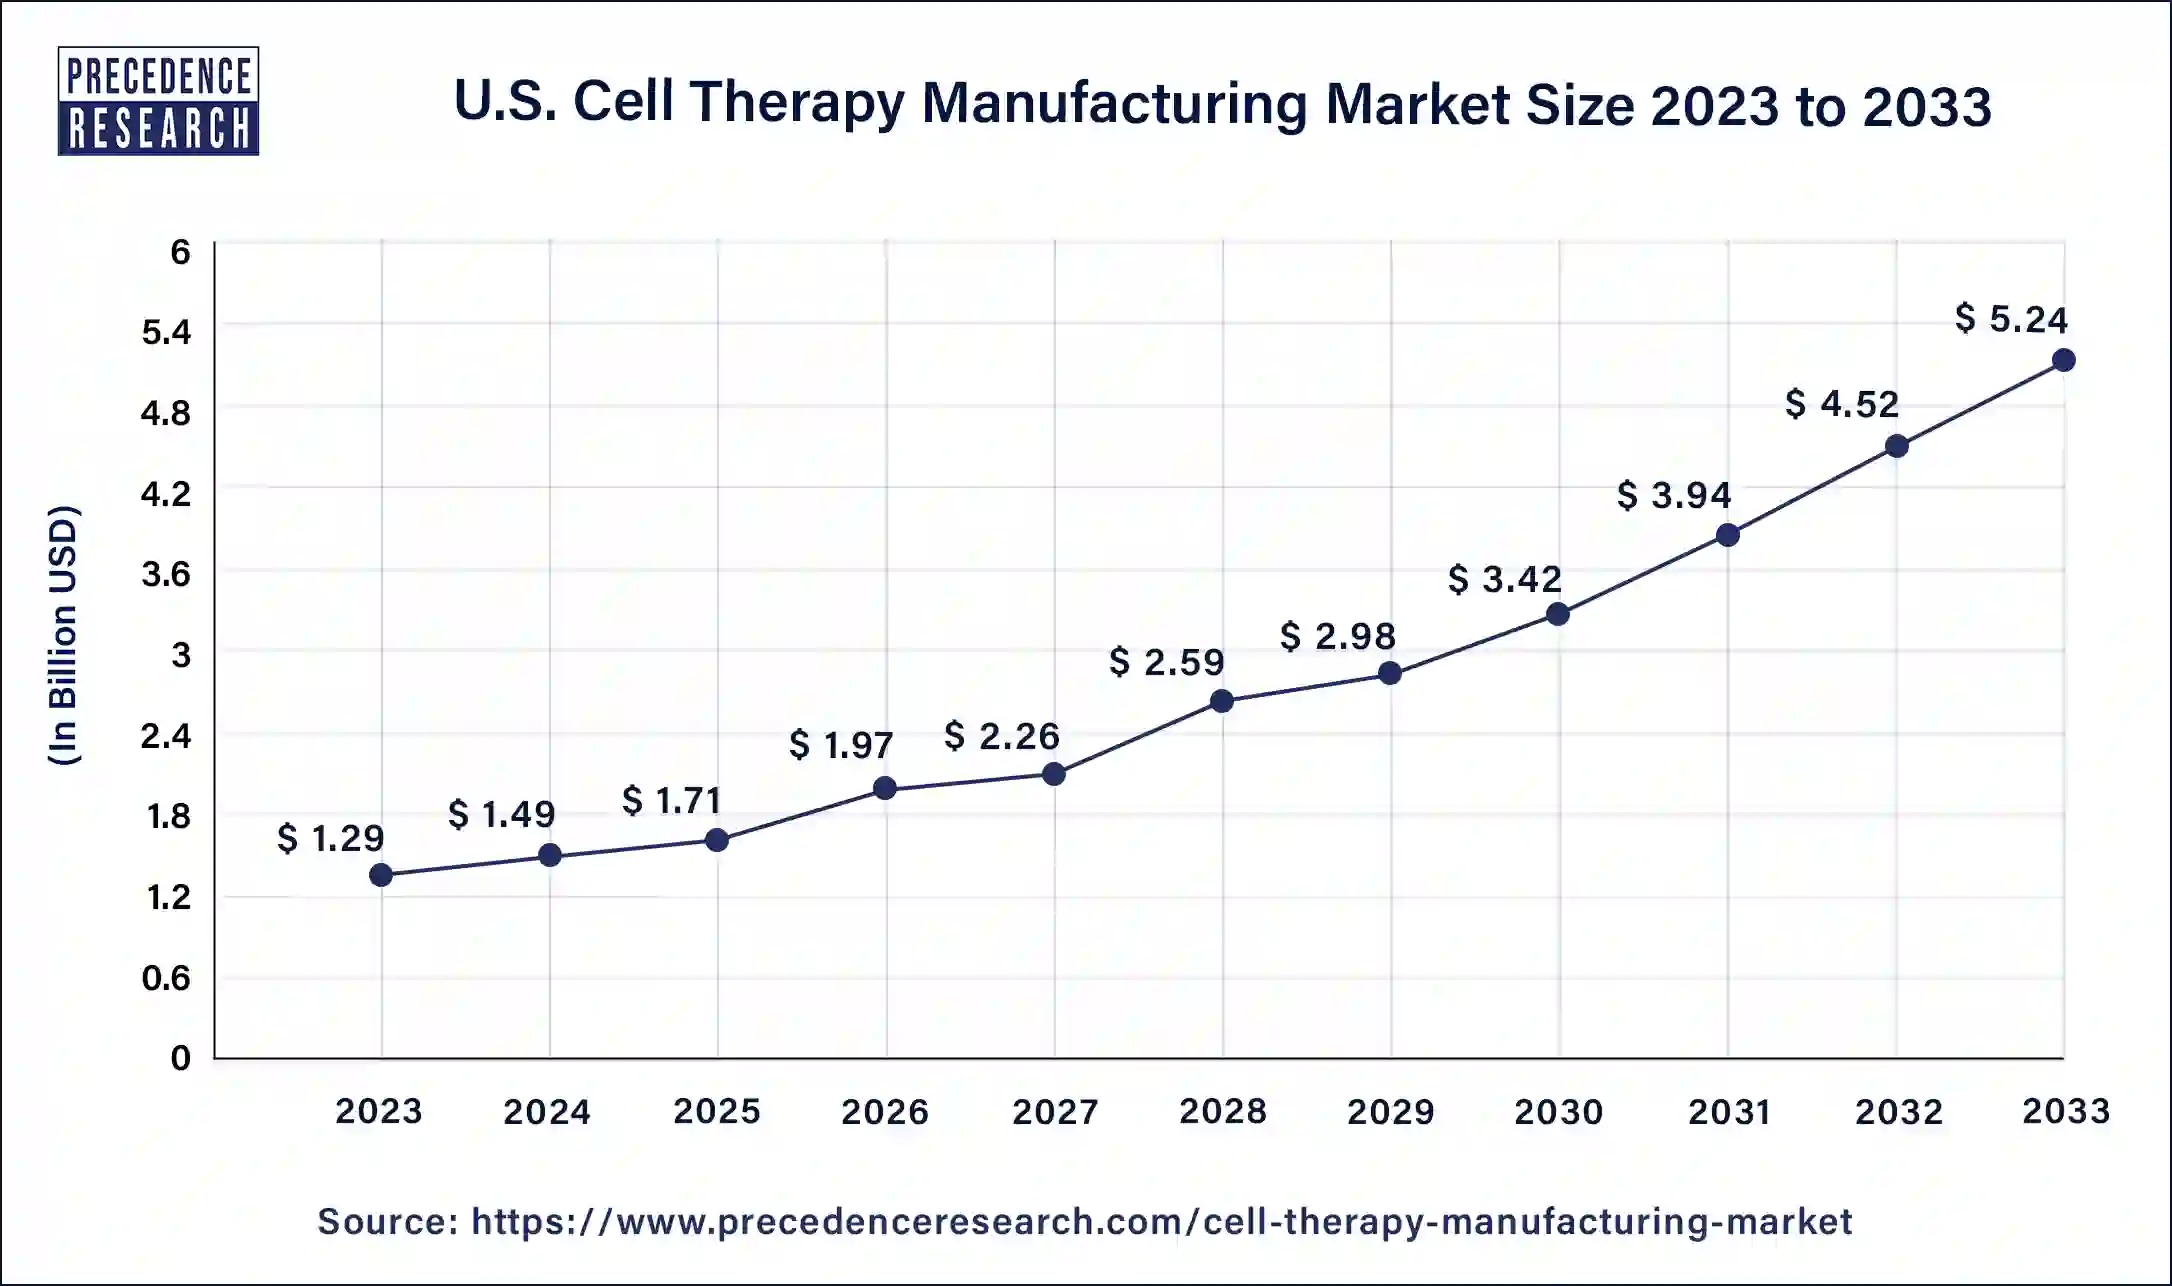 U.S. Cell Therapy Manufacturing Market Size 2024 to 2033